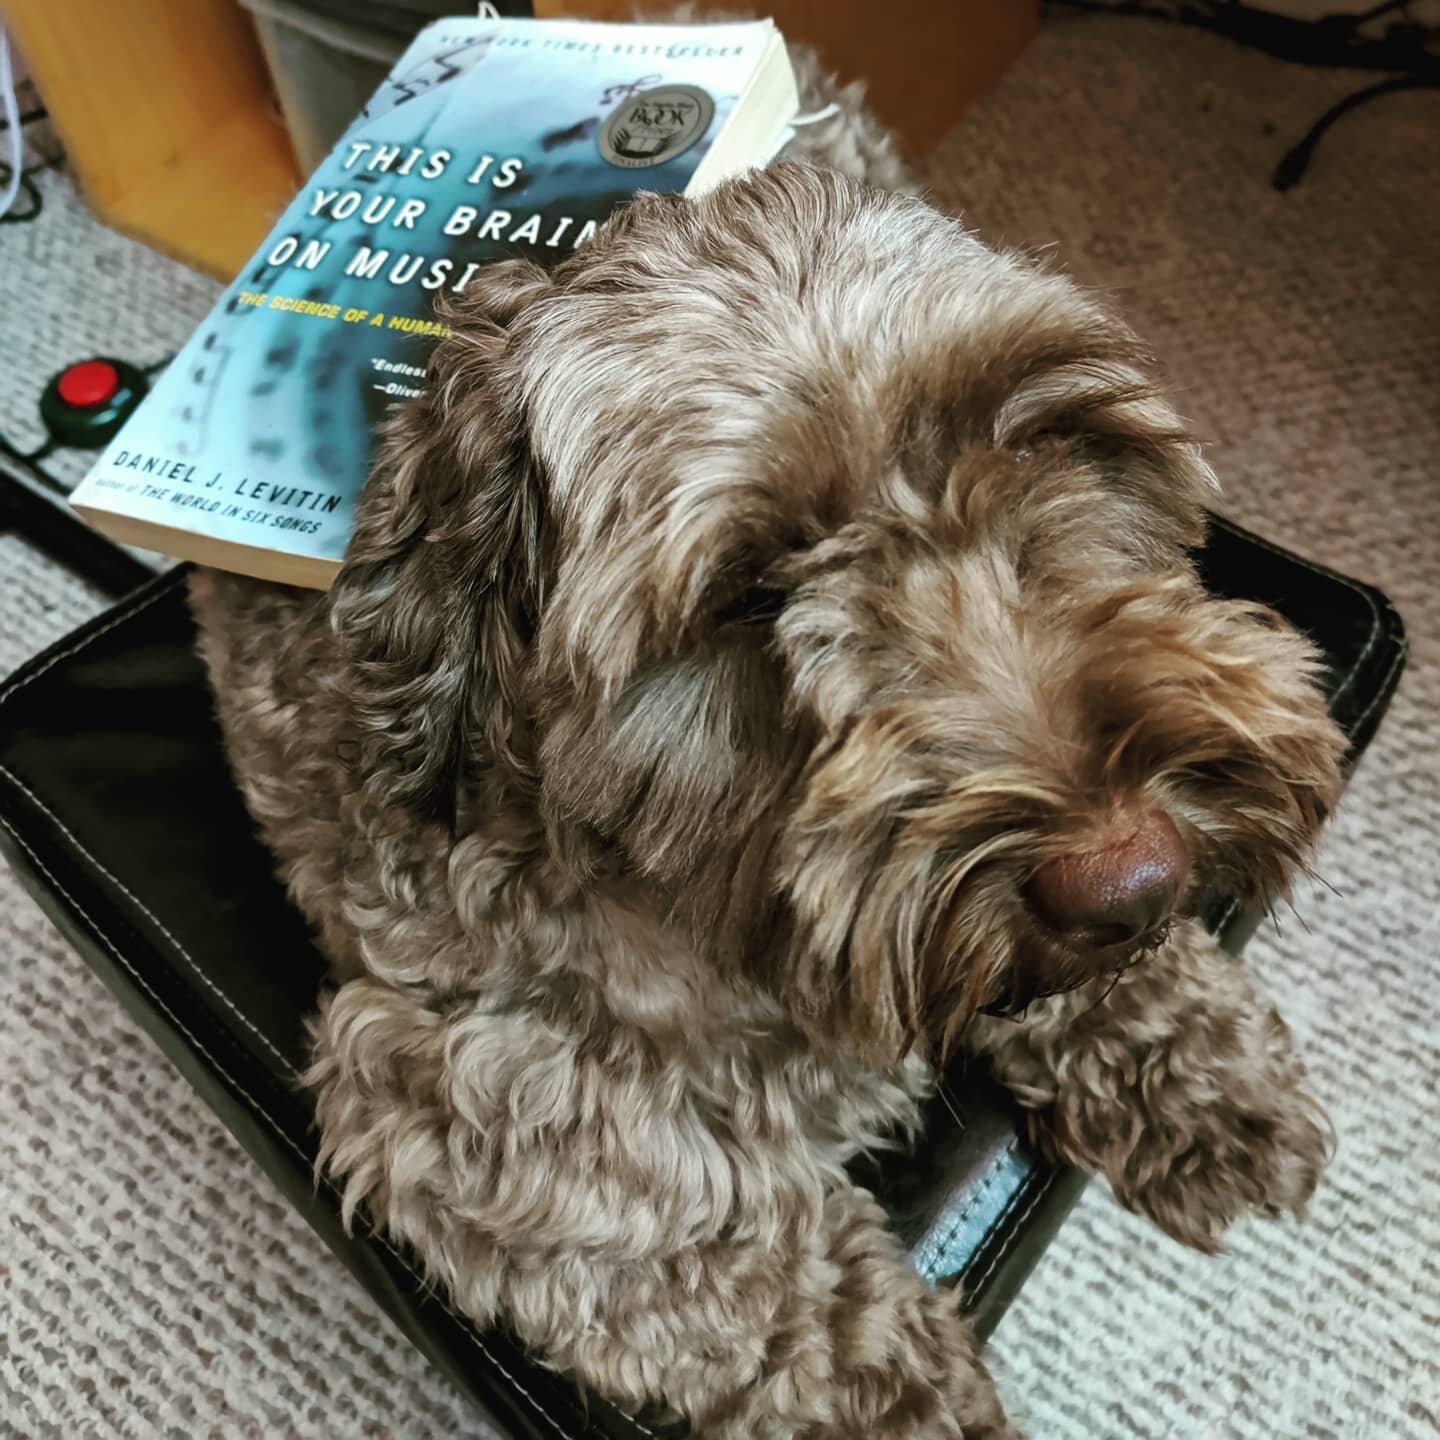 This is your brain on music on a dog on an ottoman.

No I didn't spend a half hour with treats training coconut to hold still for an insta post, why did you even ask such a weird and specific question? 

#bored #inthehouse